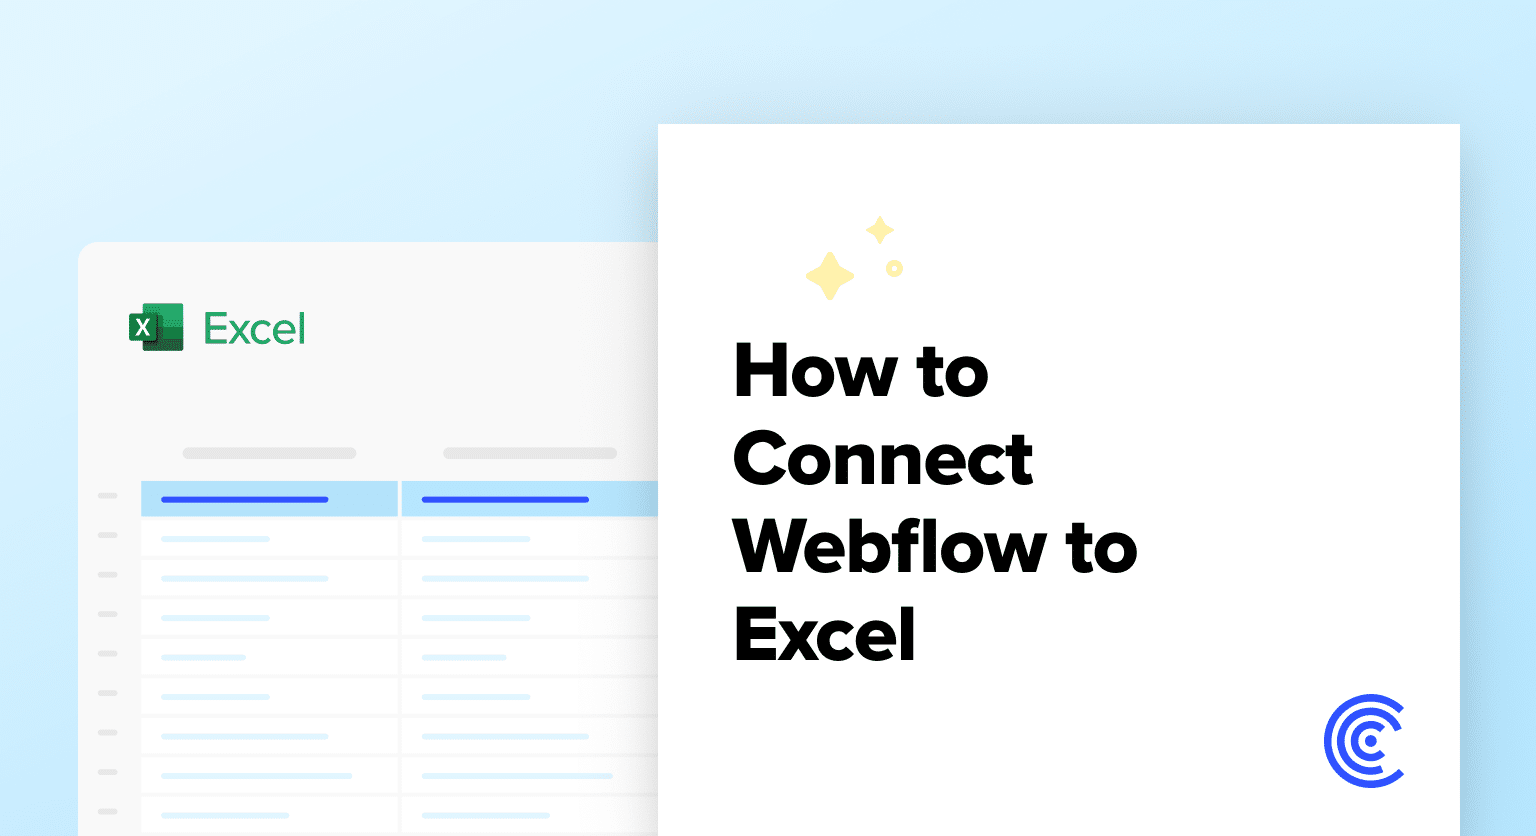 Connect Webflow to Excel